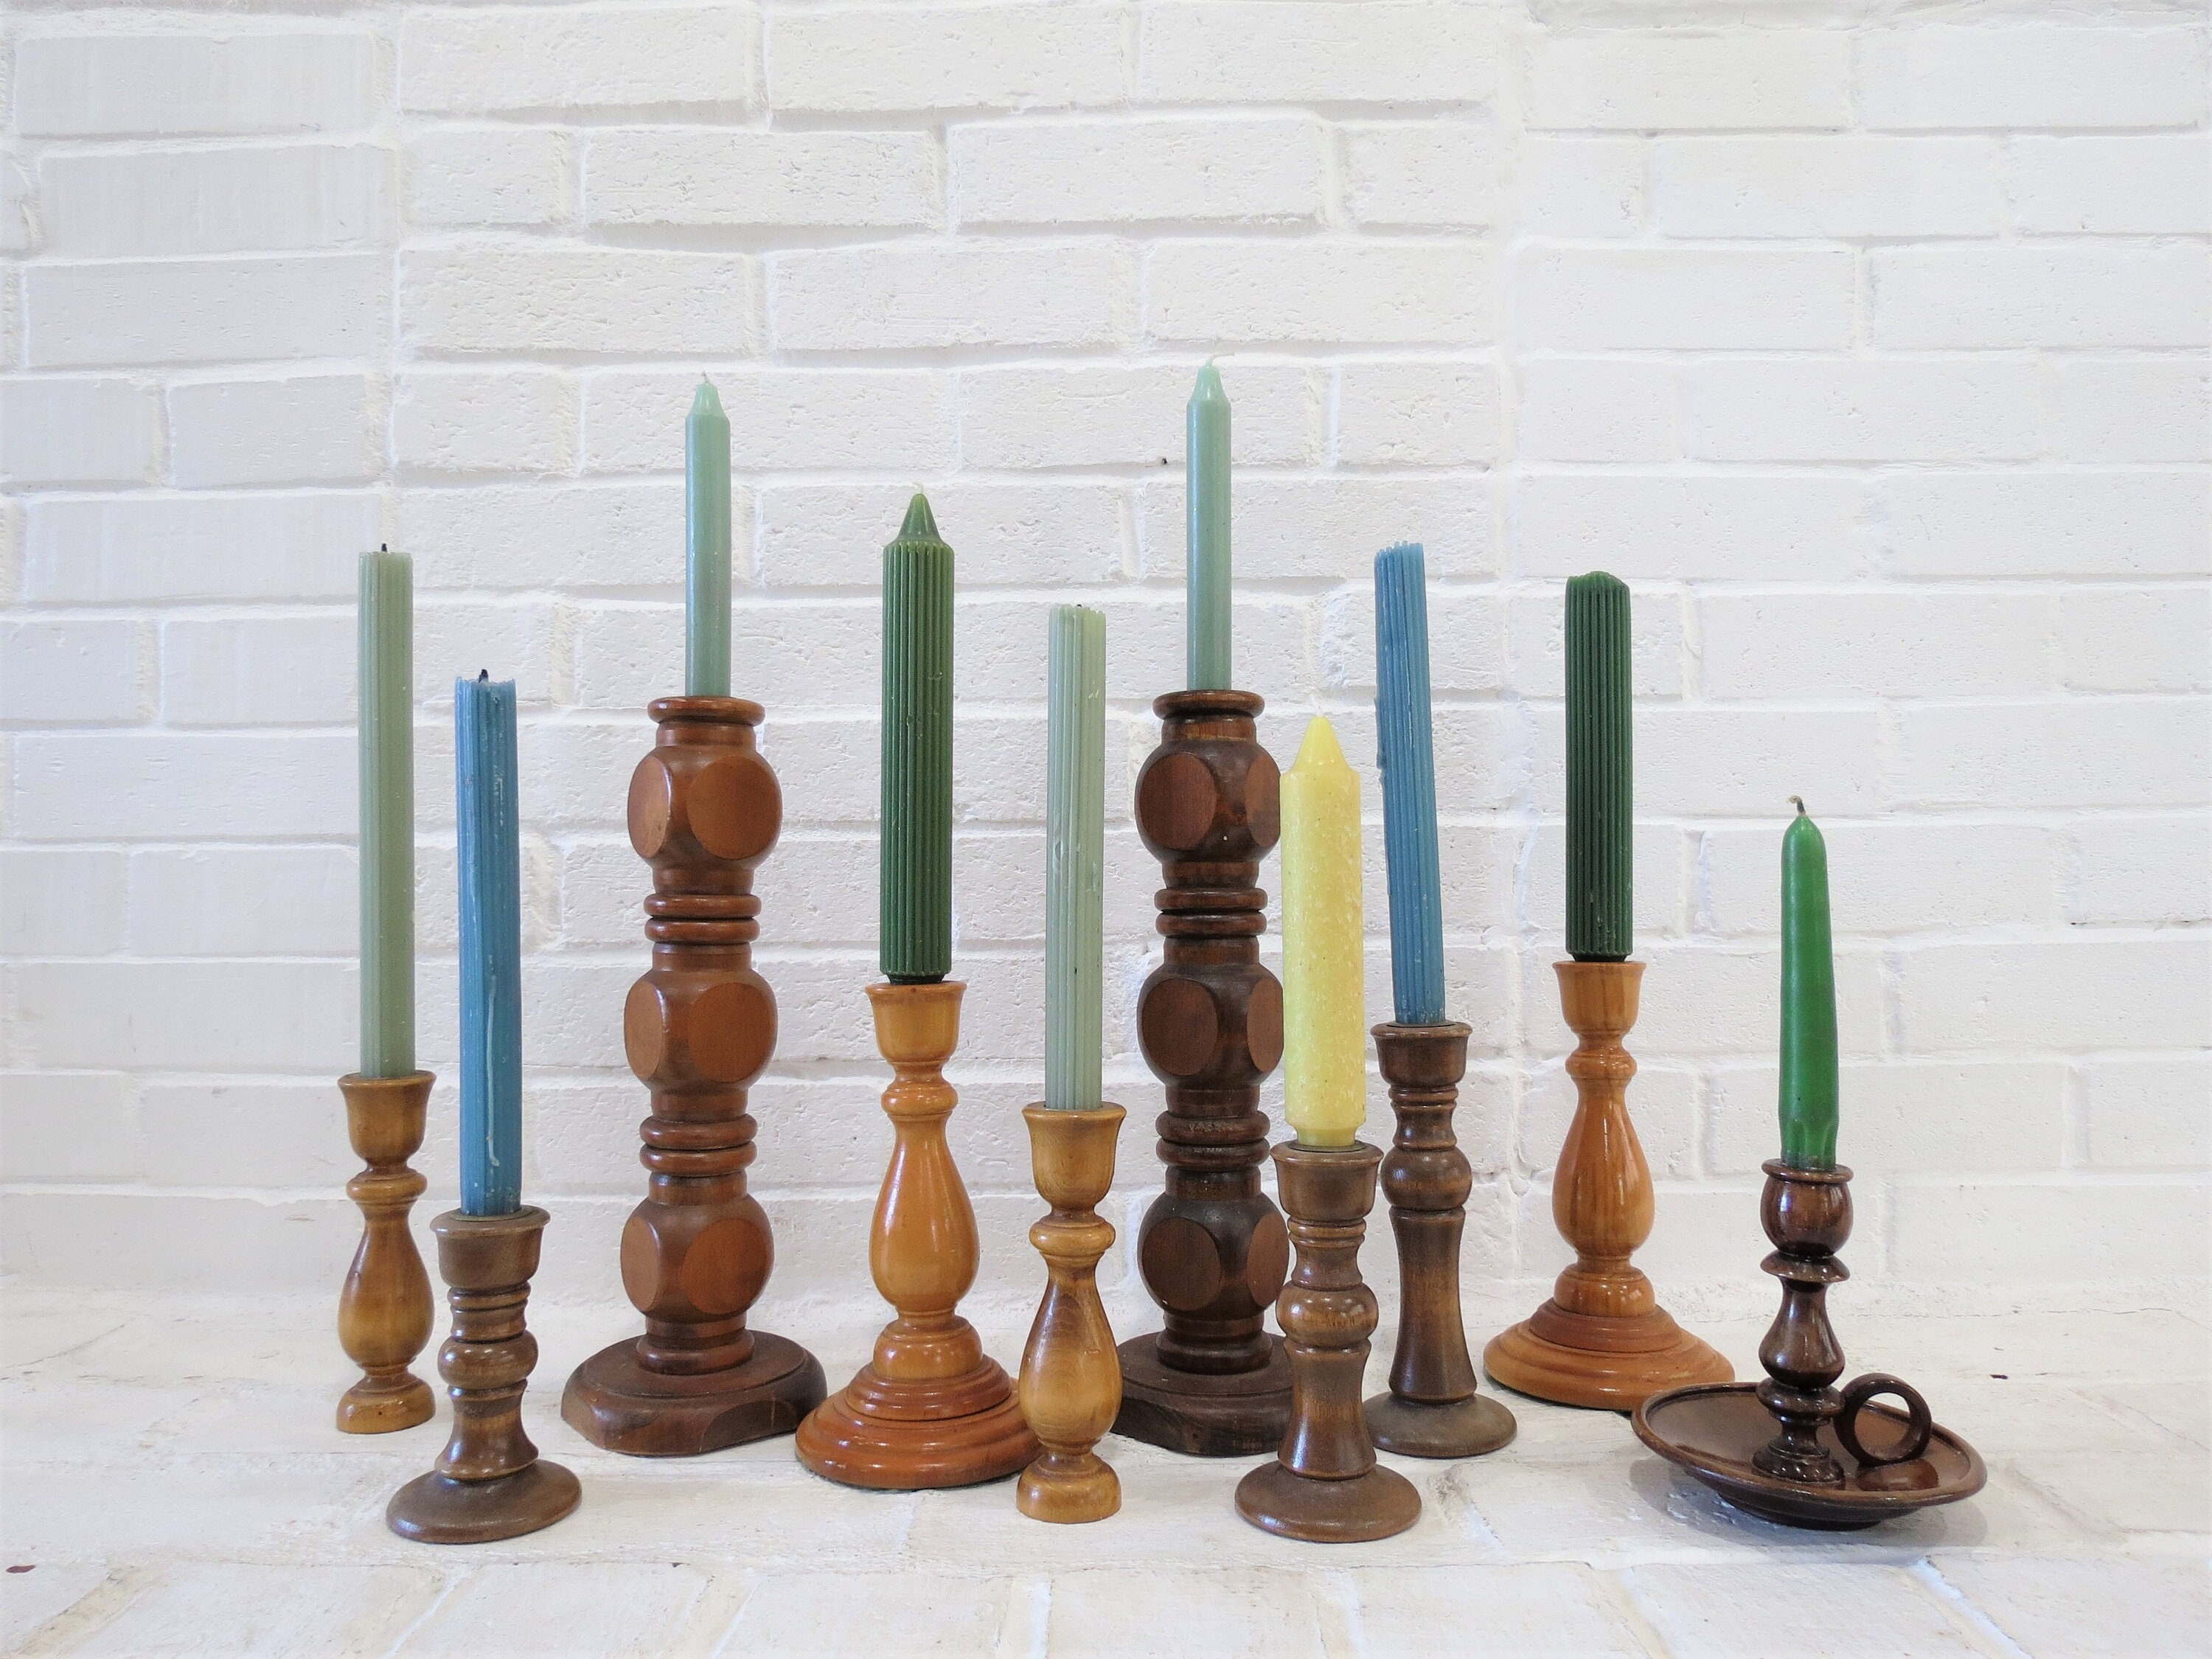 Set of 5 Wooden Candlesticks, Paired Candlesticks, Wood Candlesticks,  Natural Wood Candlesticks, Wedding Candlesticks, Home Decor FREE Ship -   Canada